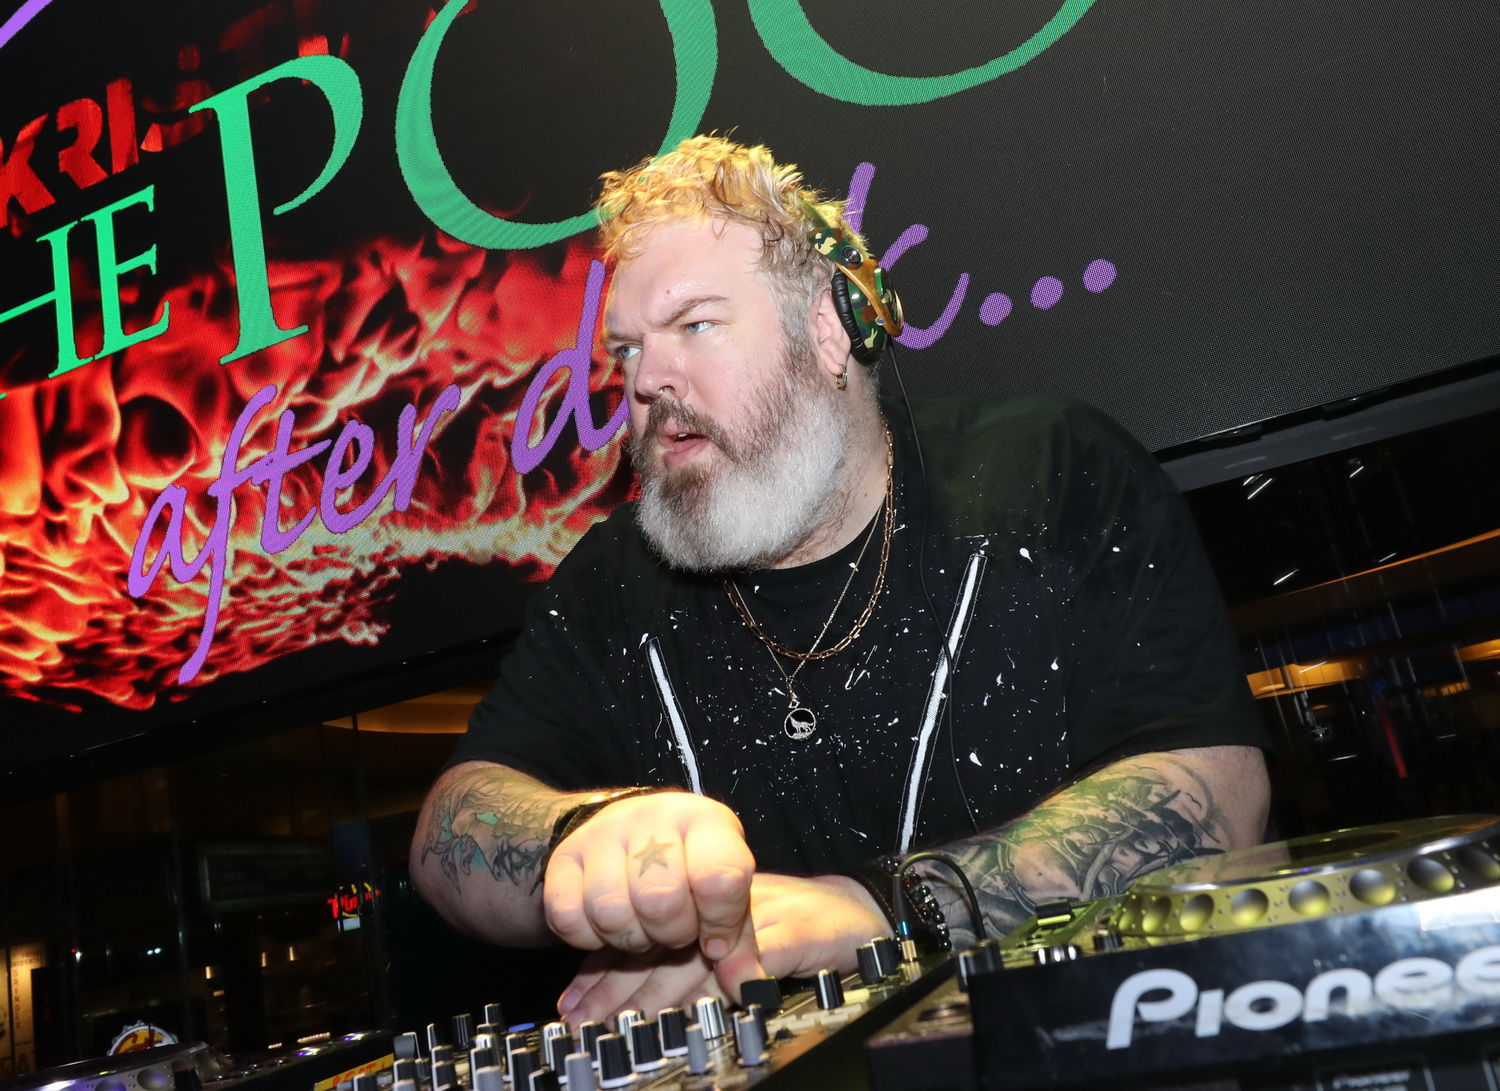 Kristian Nairn - Tomorrowland you never disappoint! ❤️... | Facebook